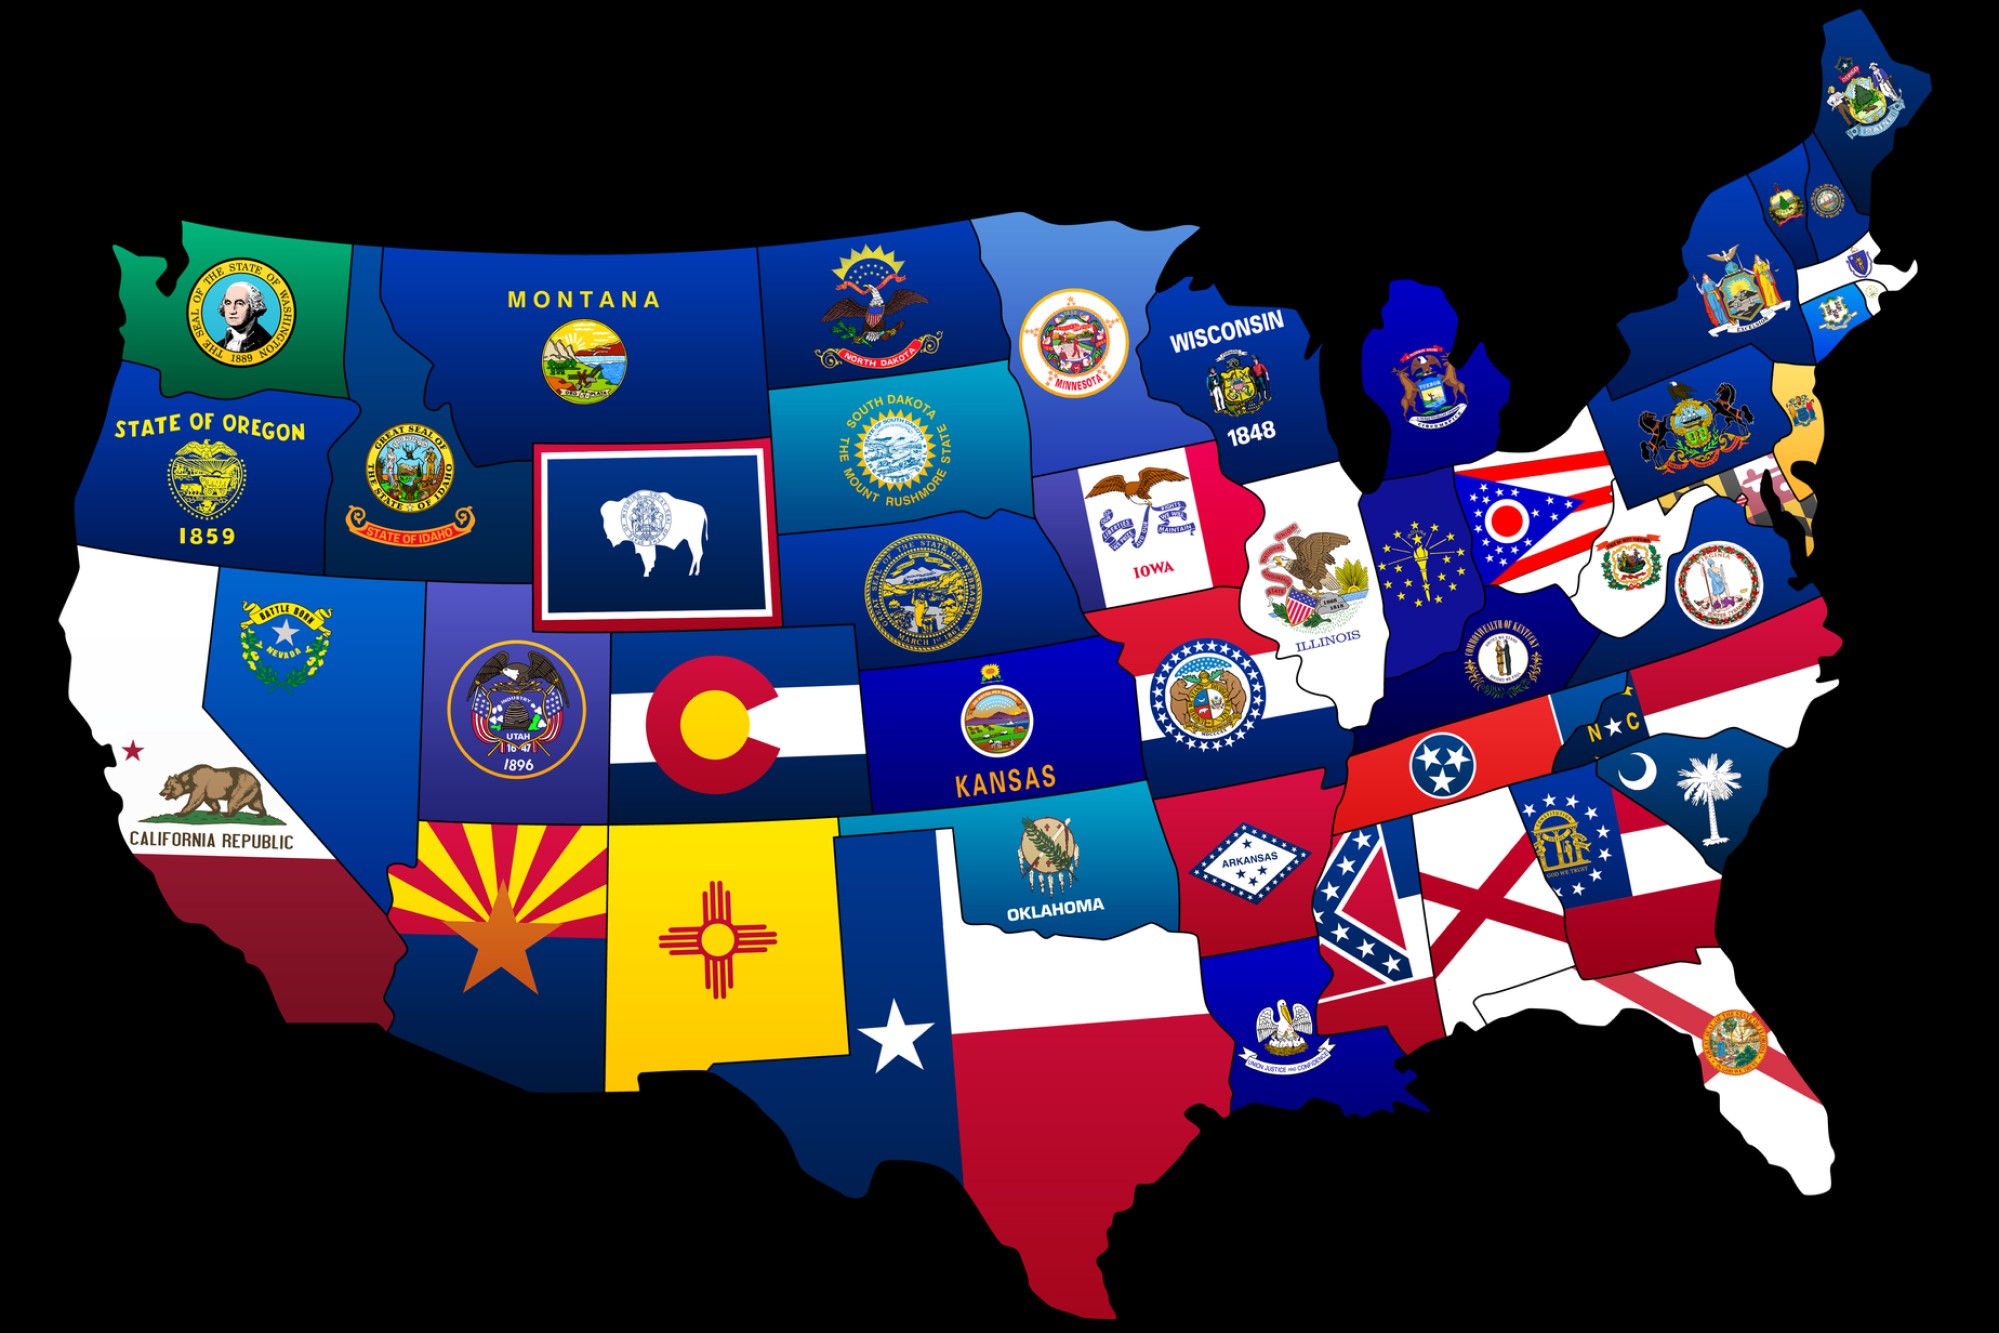 image of US map with state flags identifying borders